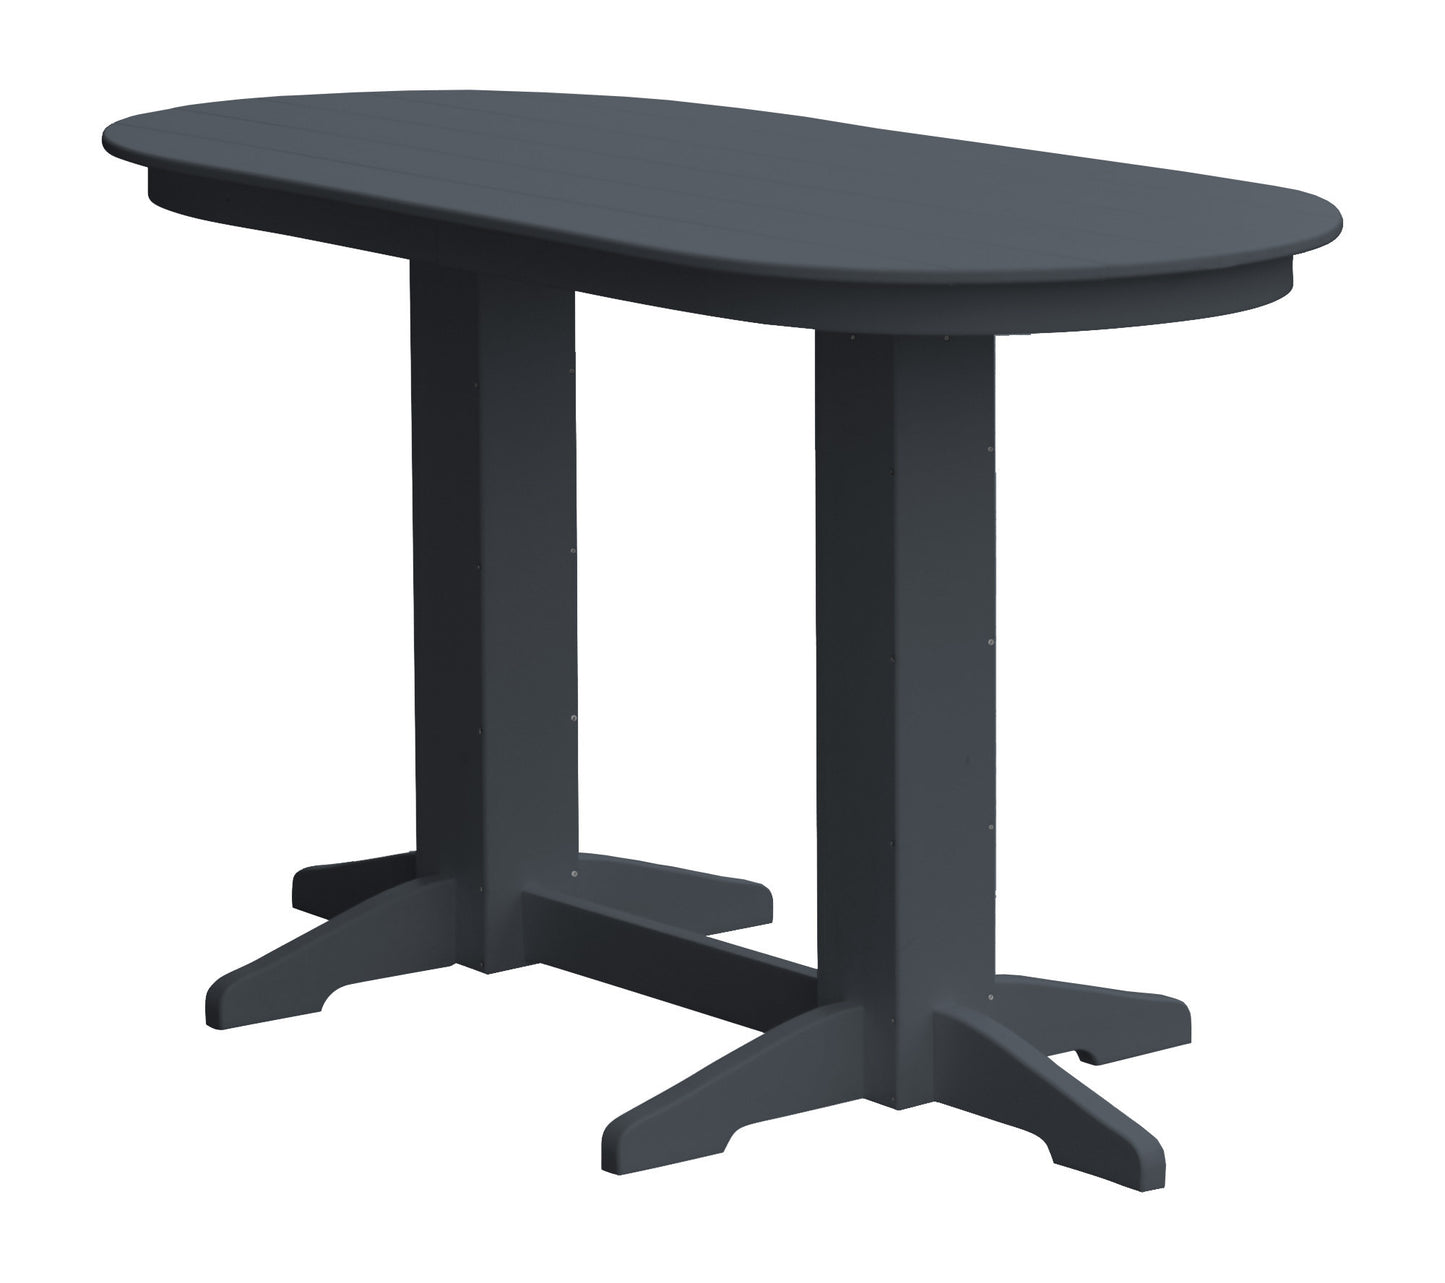 A&L Furniture Recycled Plastic 6' Oval Bar Table - Dark Gray